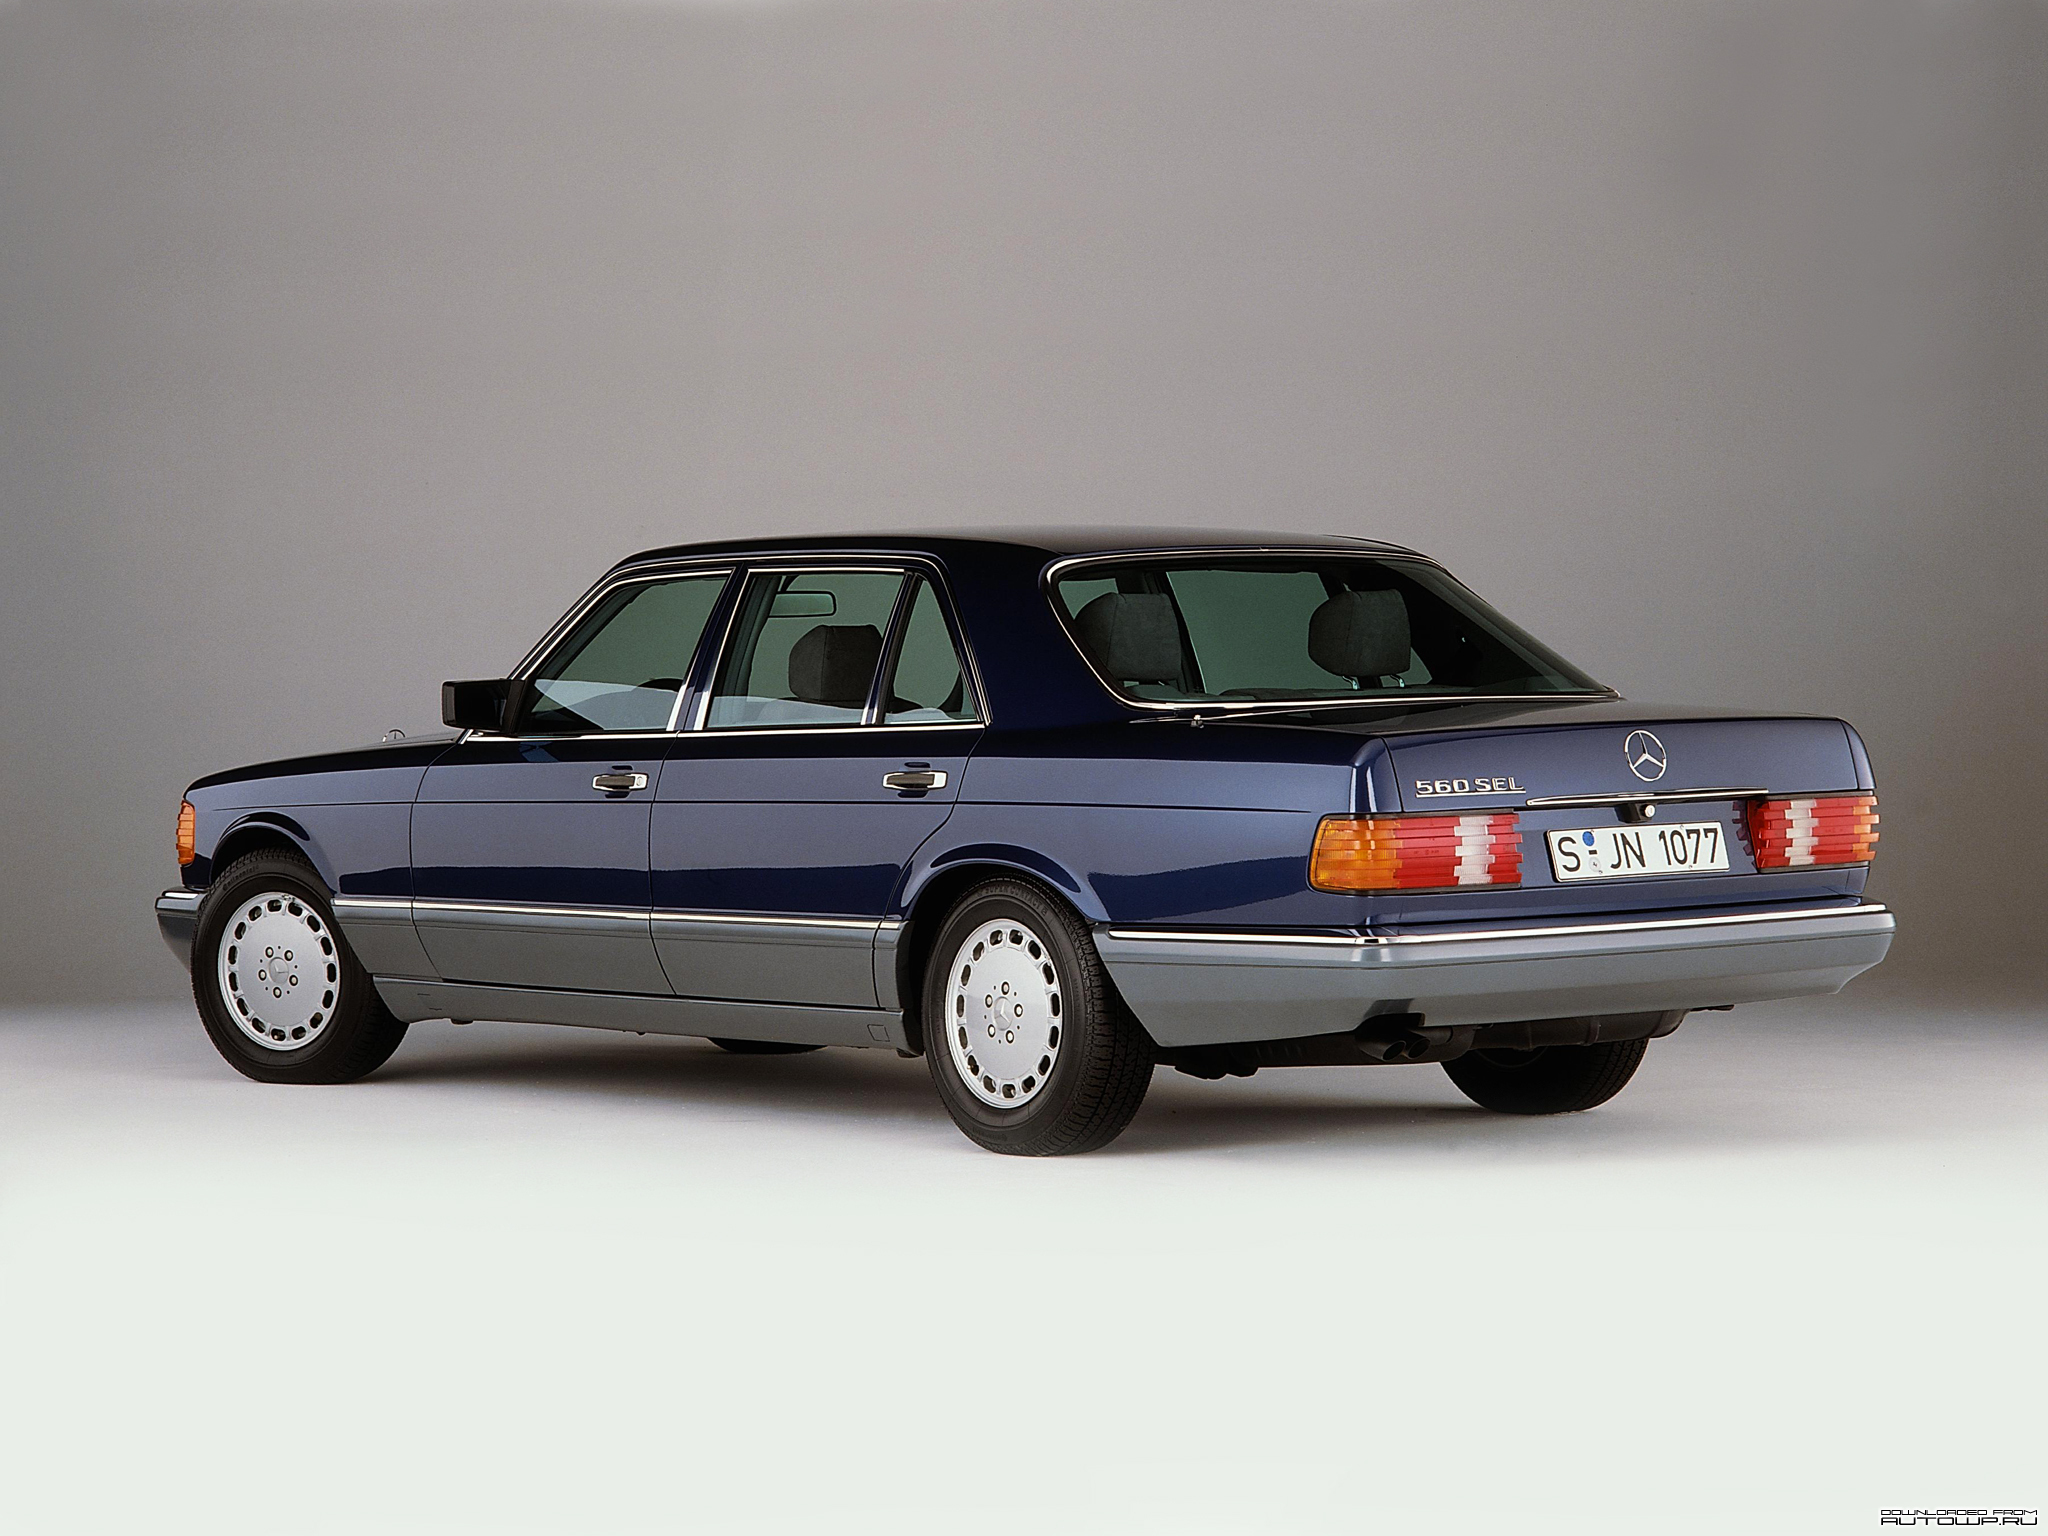 You can vote for this Mercedes-Benz S-Class W126 photo